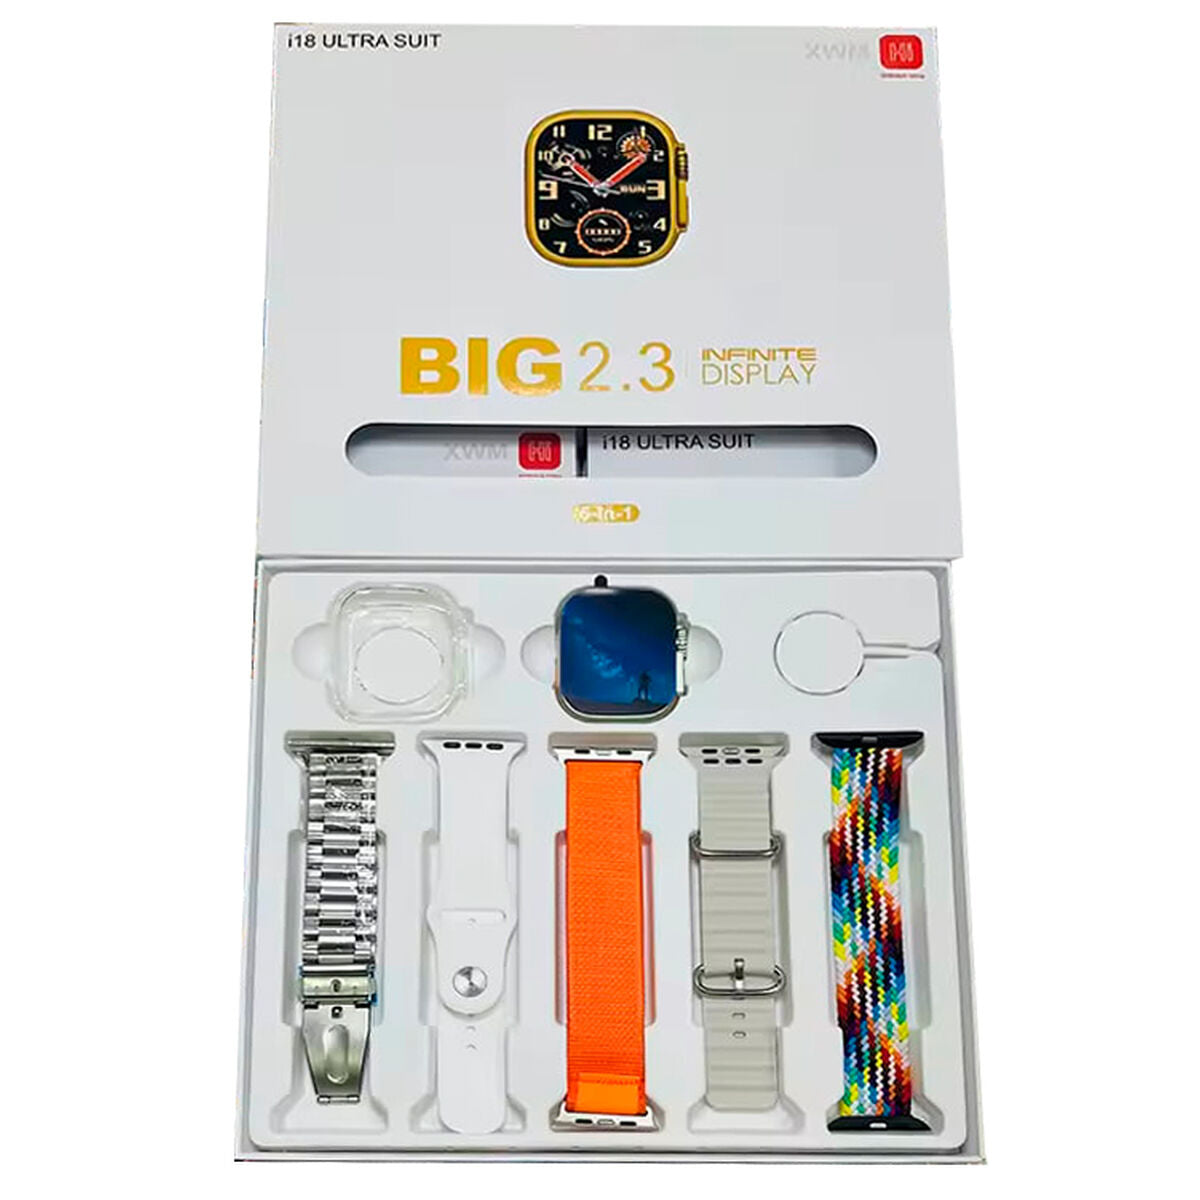 Smartwatch HiWatch Ultra BIG-2-3-WHT, HiWatch Ultra, Watches, Men, smartwatch-hiwatch-ultra-big-2-3-wht, Brand_HiWatch Ultra, category-reference-2609, category-reference-2617, category-reference-2634, category-reference-t-19667, category-reference-t-19724, category-reference-t-20348, Condition_NEW, original gifts, Price_50 - 100, telephones & tablets, wifi y bluetooth, RiotNook